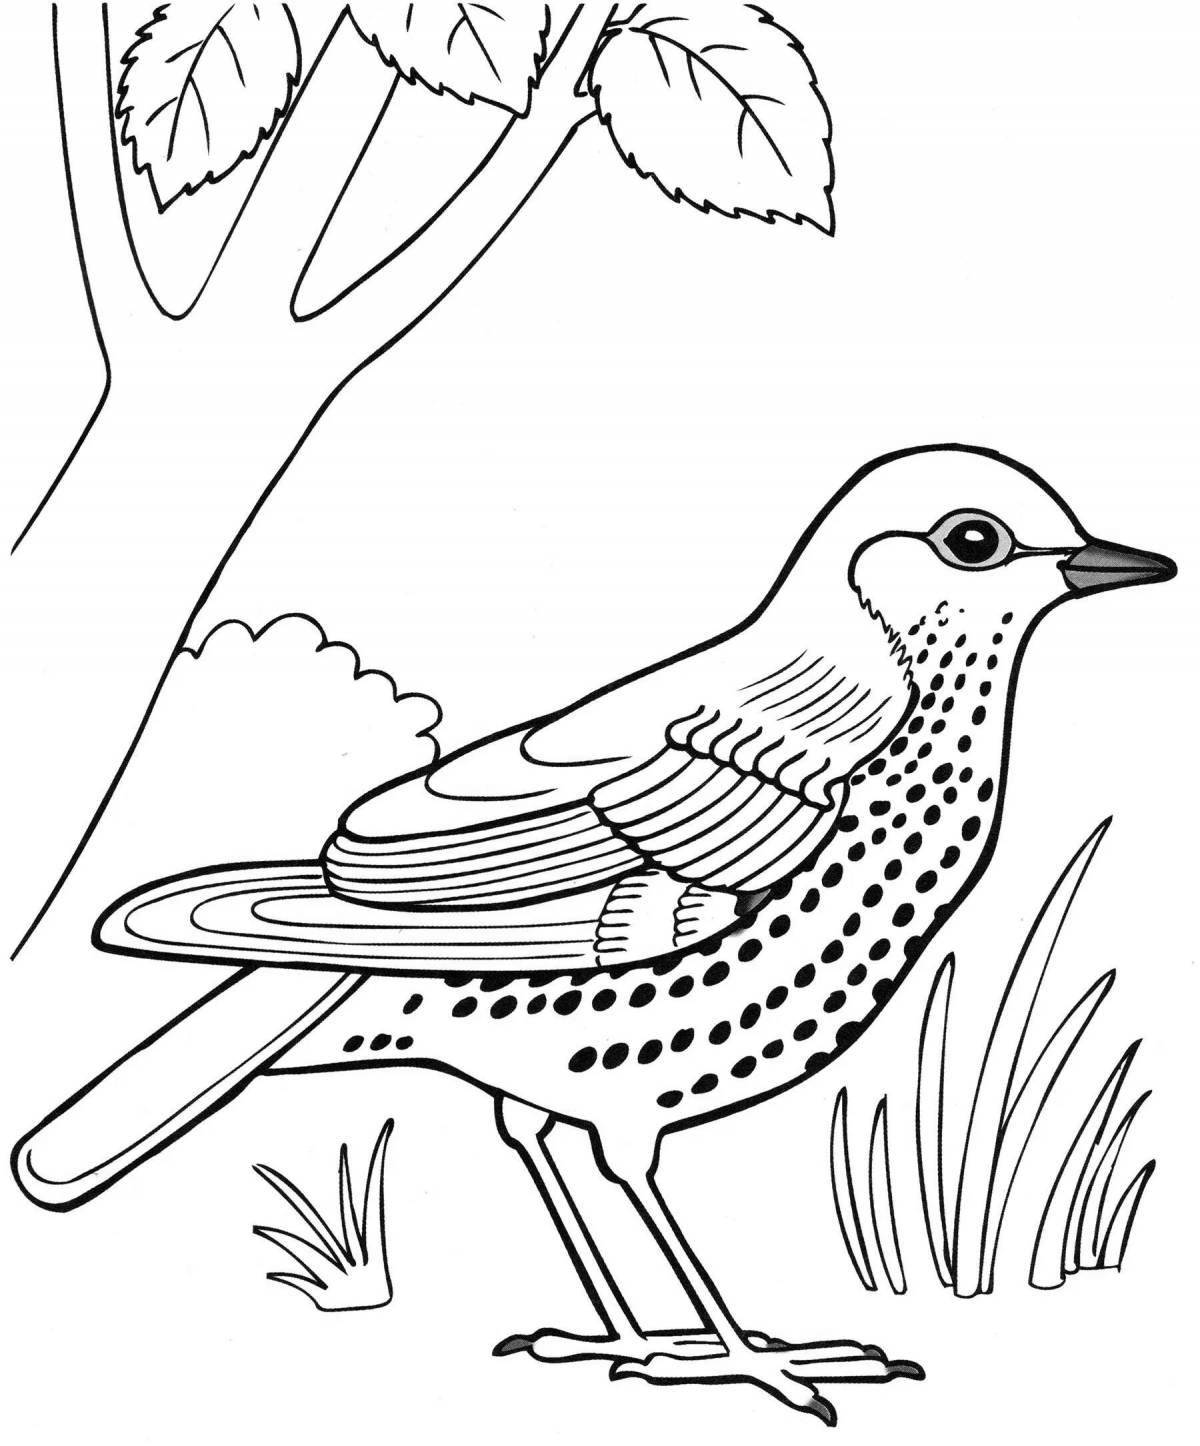 Coloring pages migratory birds coloring pages for children 6-7 years old